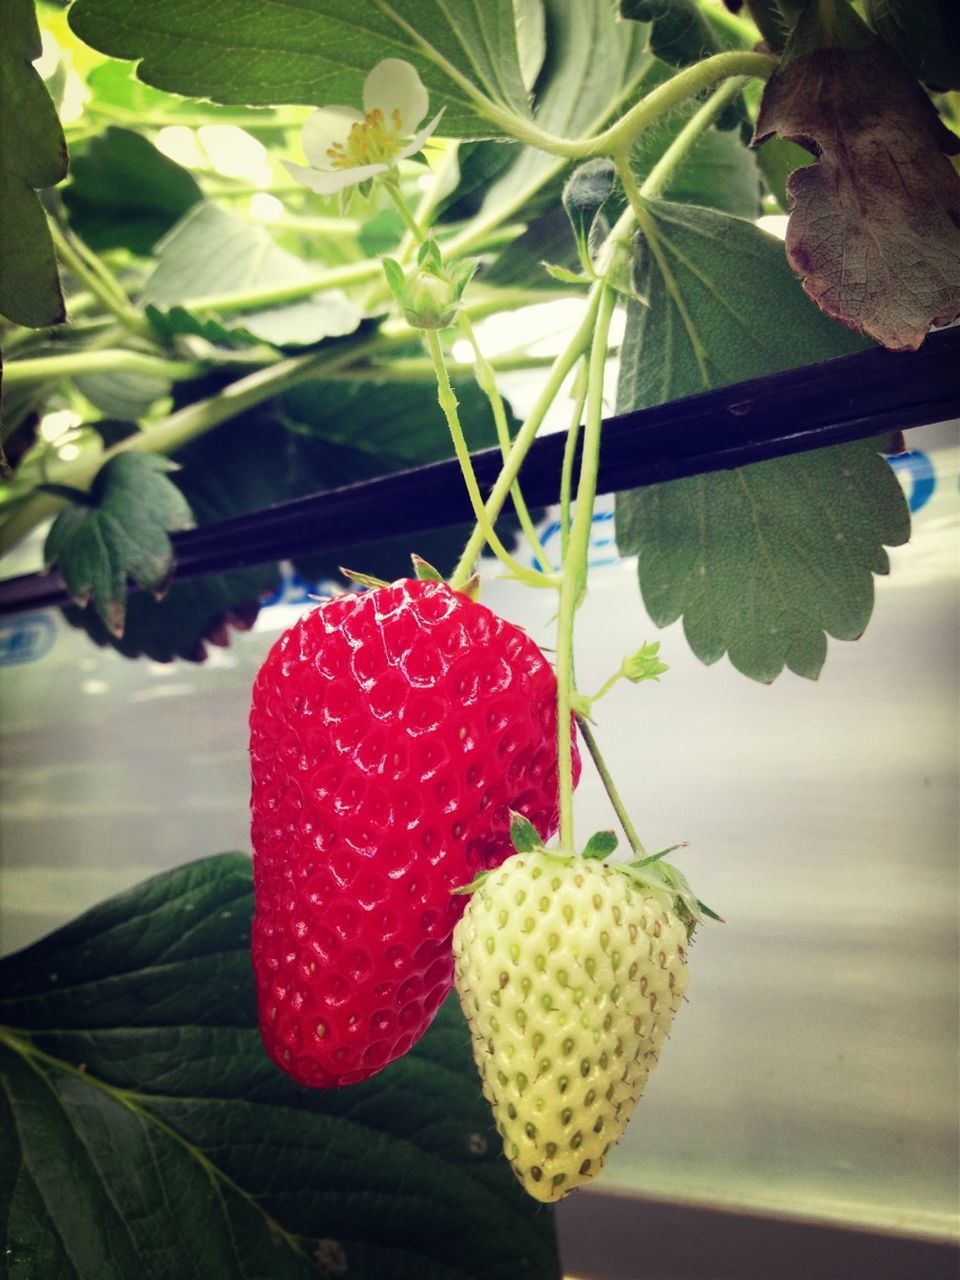 freshness, fruit, food and drink, growth, leaf, red, flower, food, plant, healthy eating, nature, tree, beauty in nature, close-up, berry fruit, ripe, hanging, water, focus on foreground, strawberry